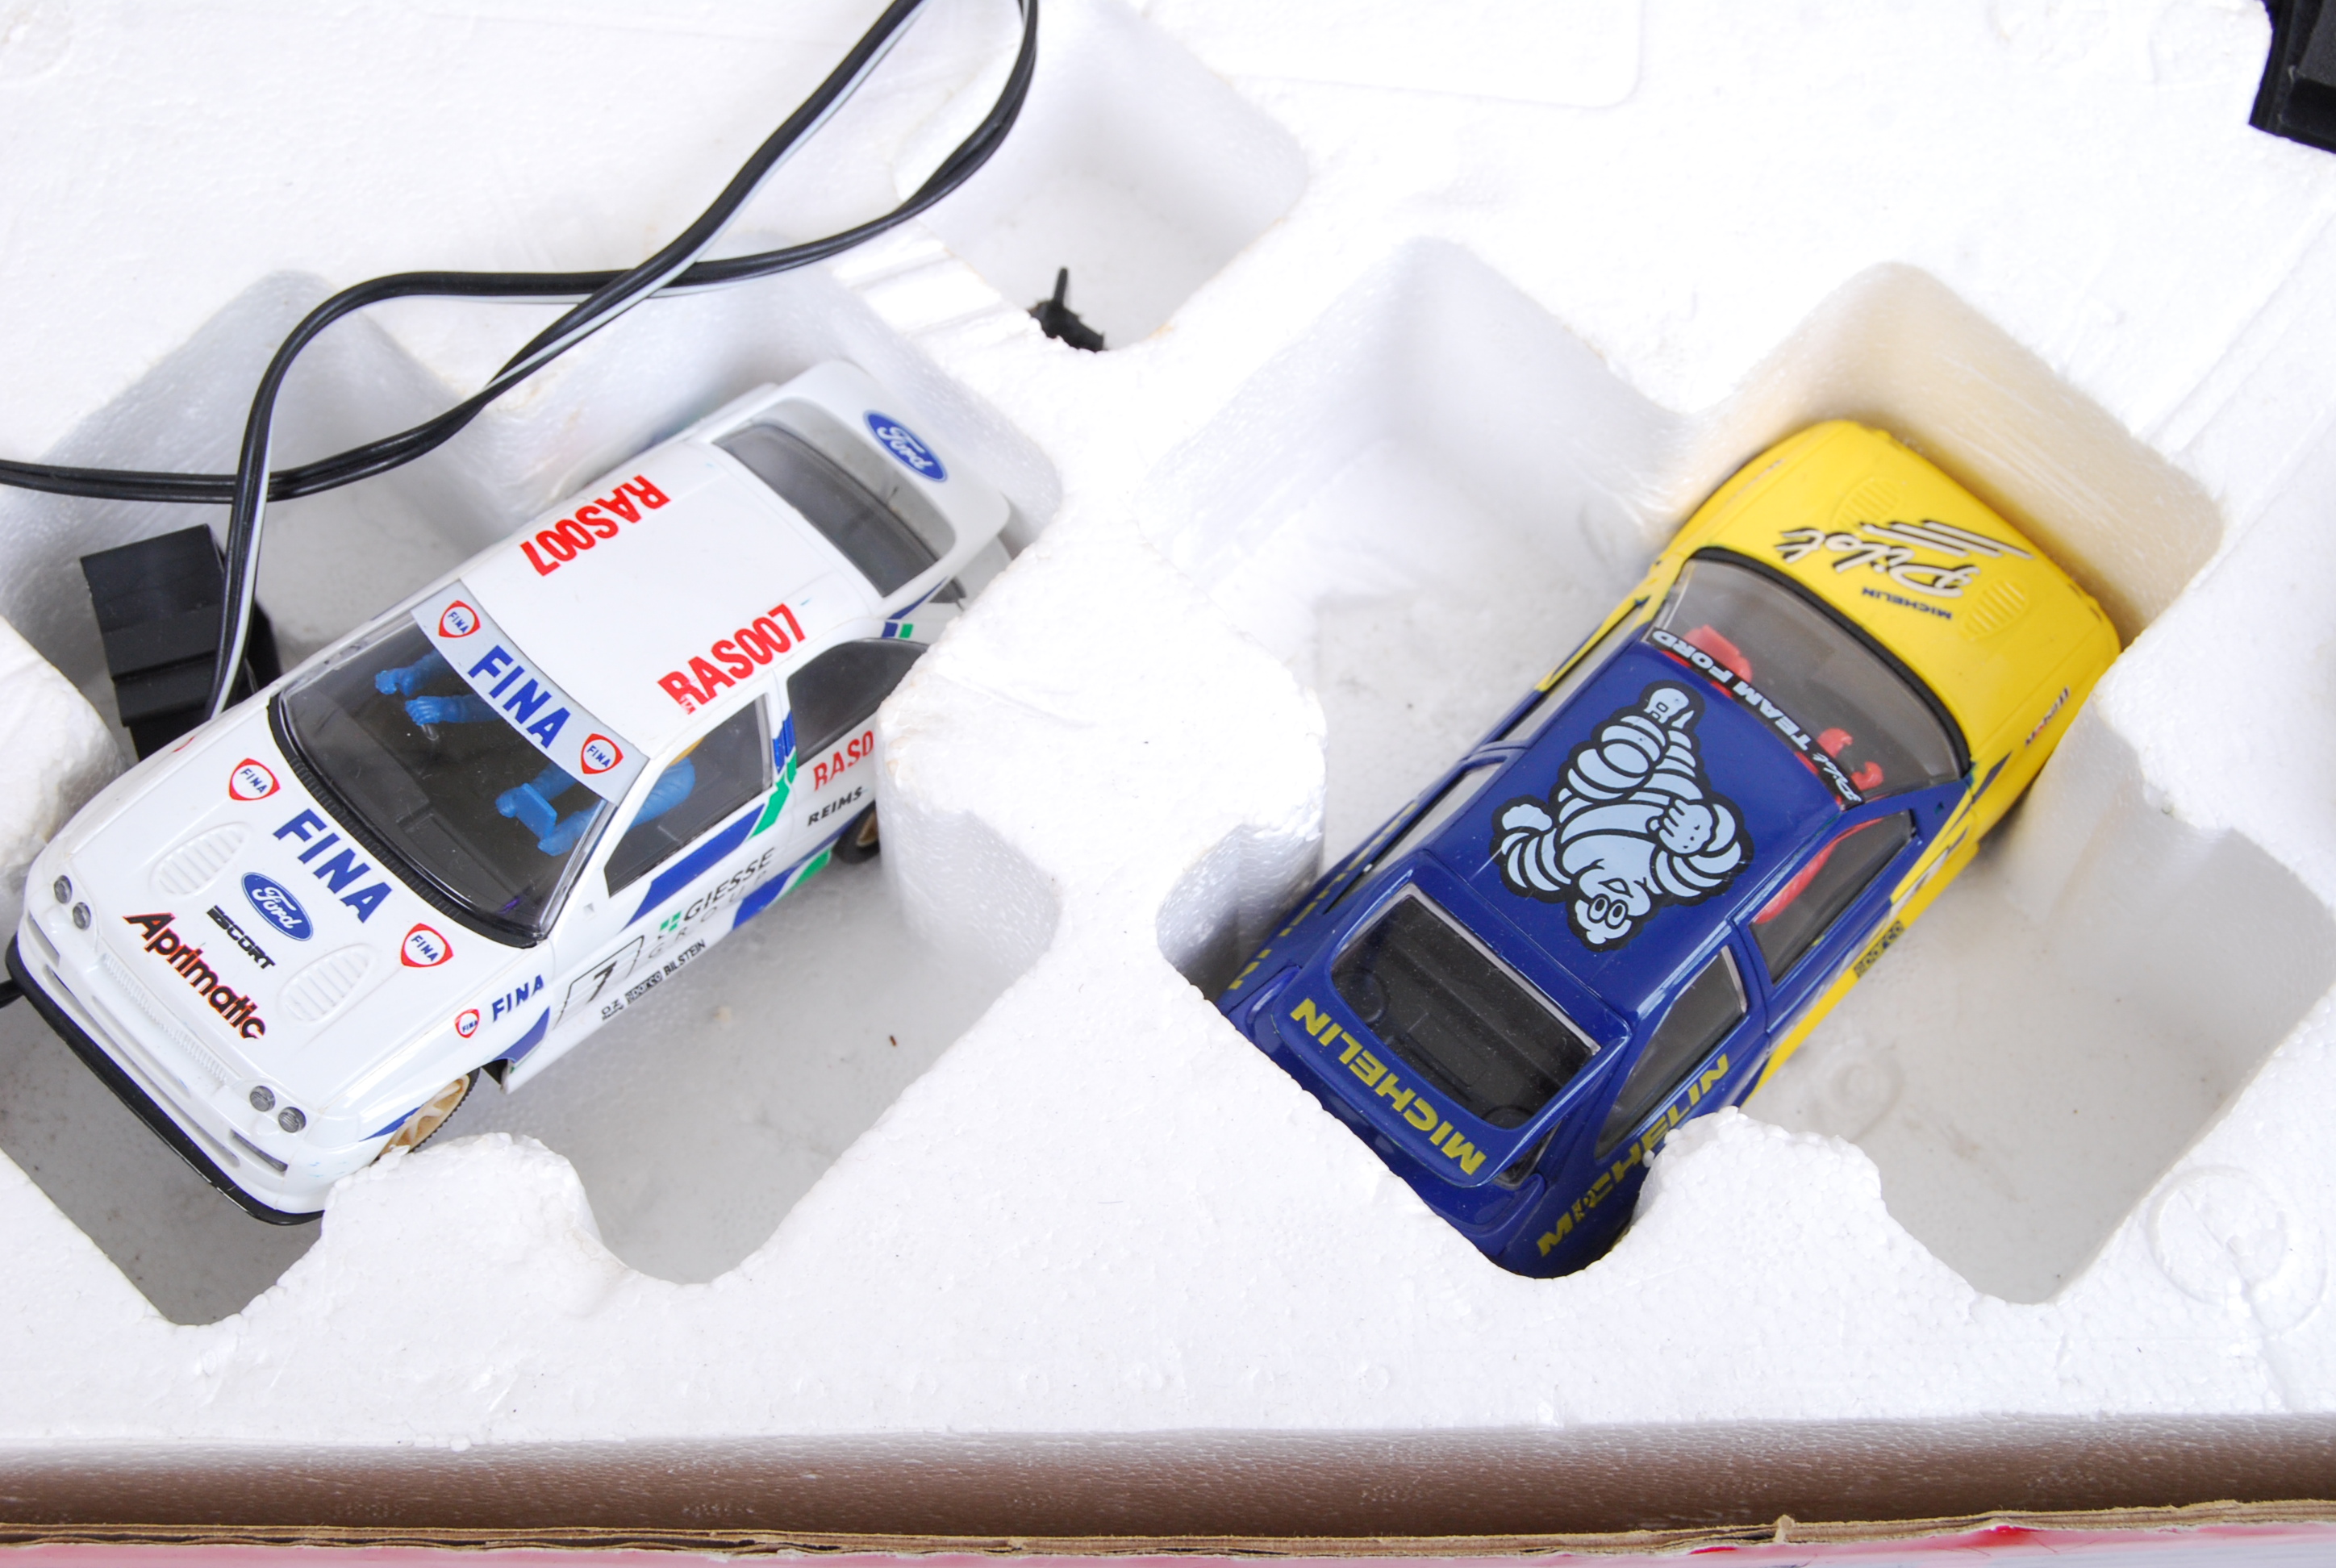 SCALEXTRIC: A Scalextric racing set ' Escort Rally ' appears complete with both cars, controllers, - Image 3 of 3